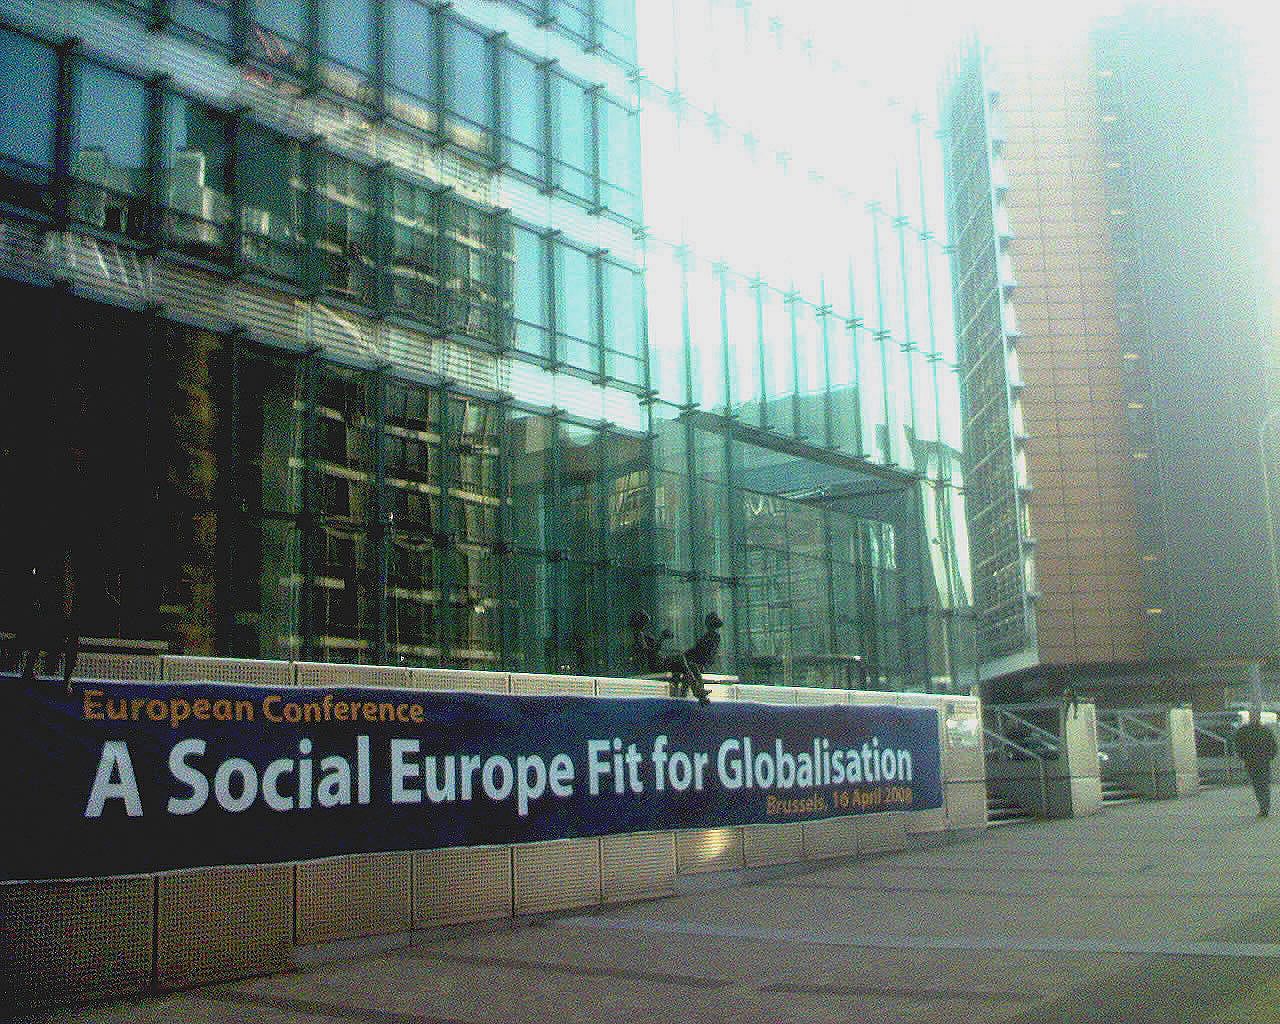 Is social Europe fit for globalization? 11-04-2008